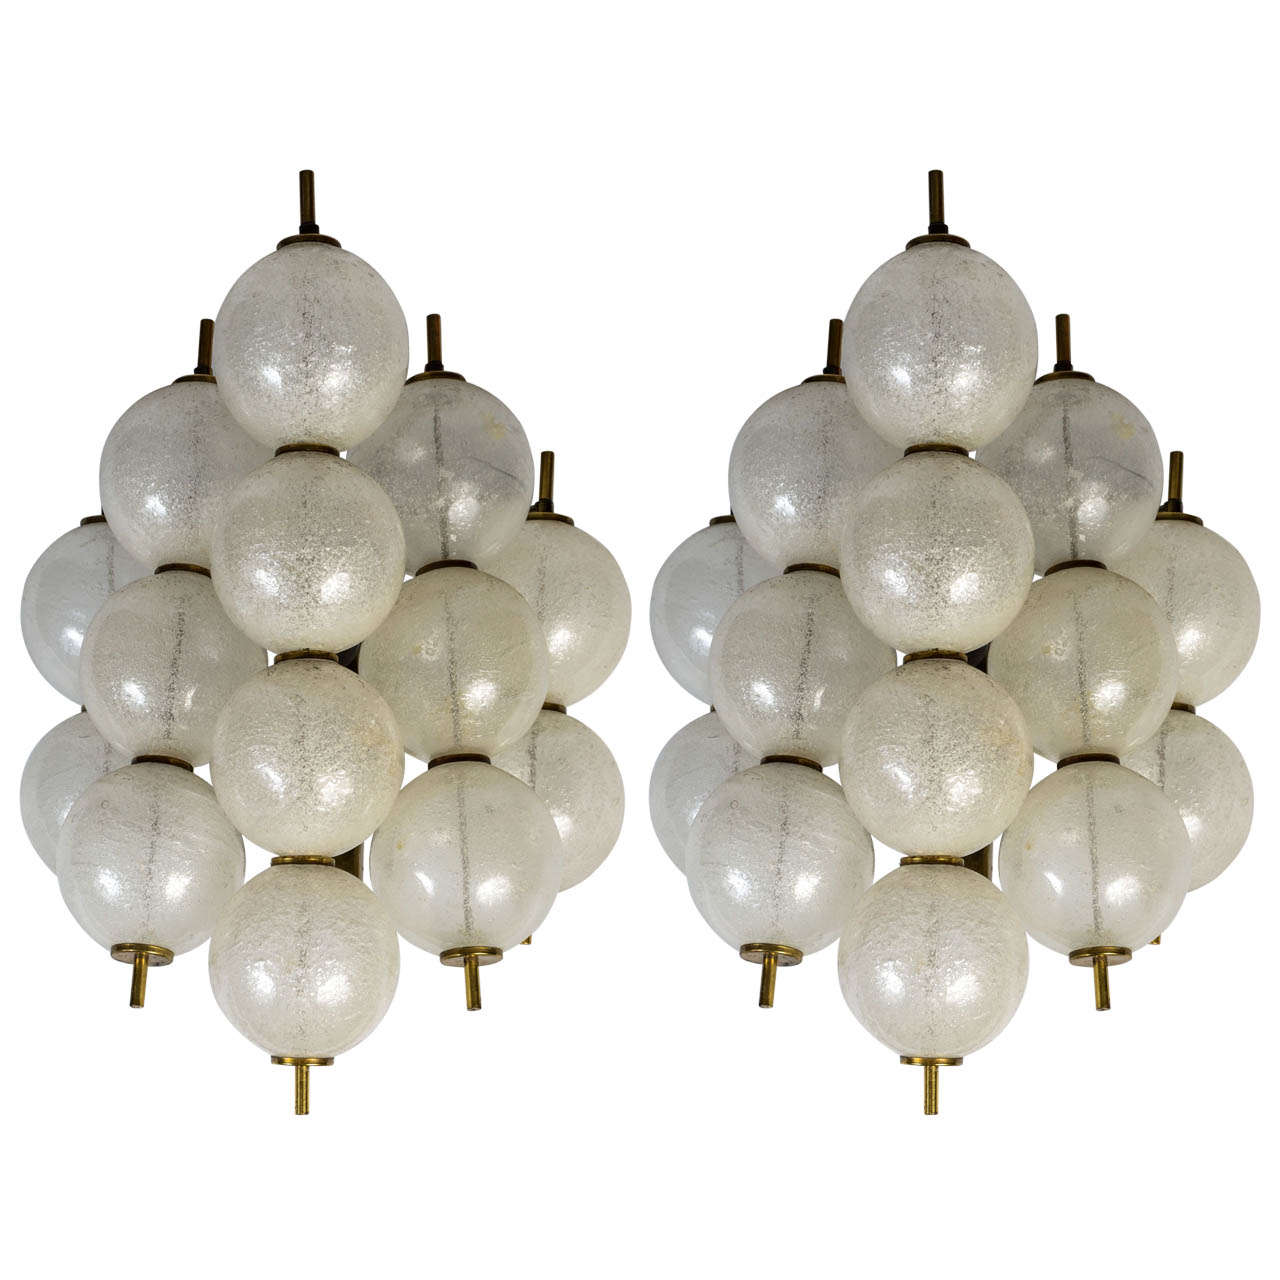 1960's Sconces Attributed to Verner Panton